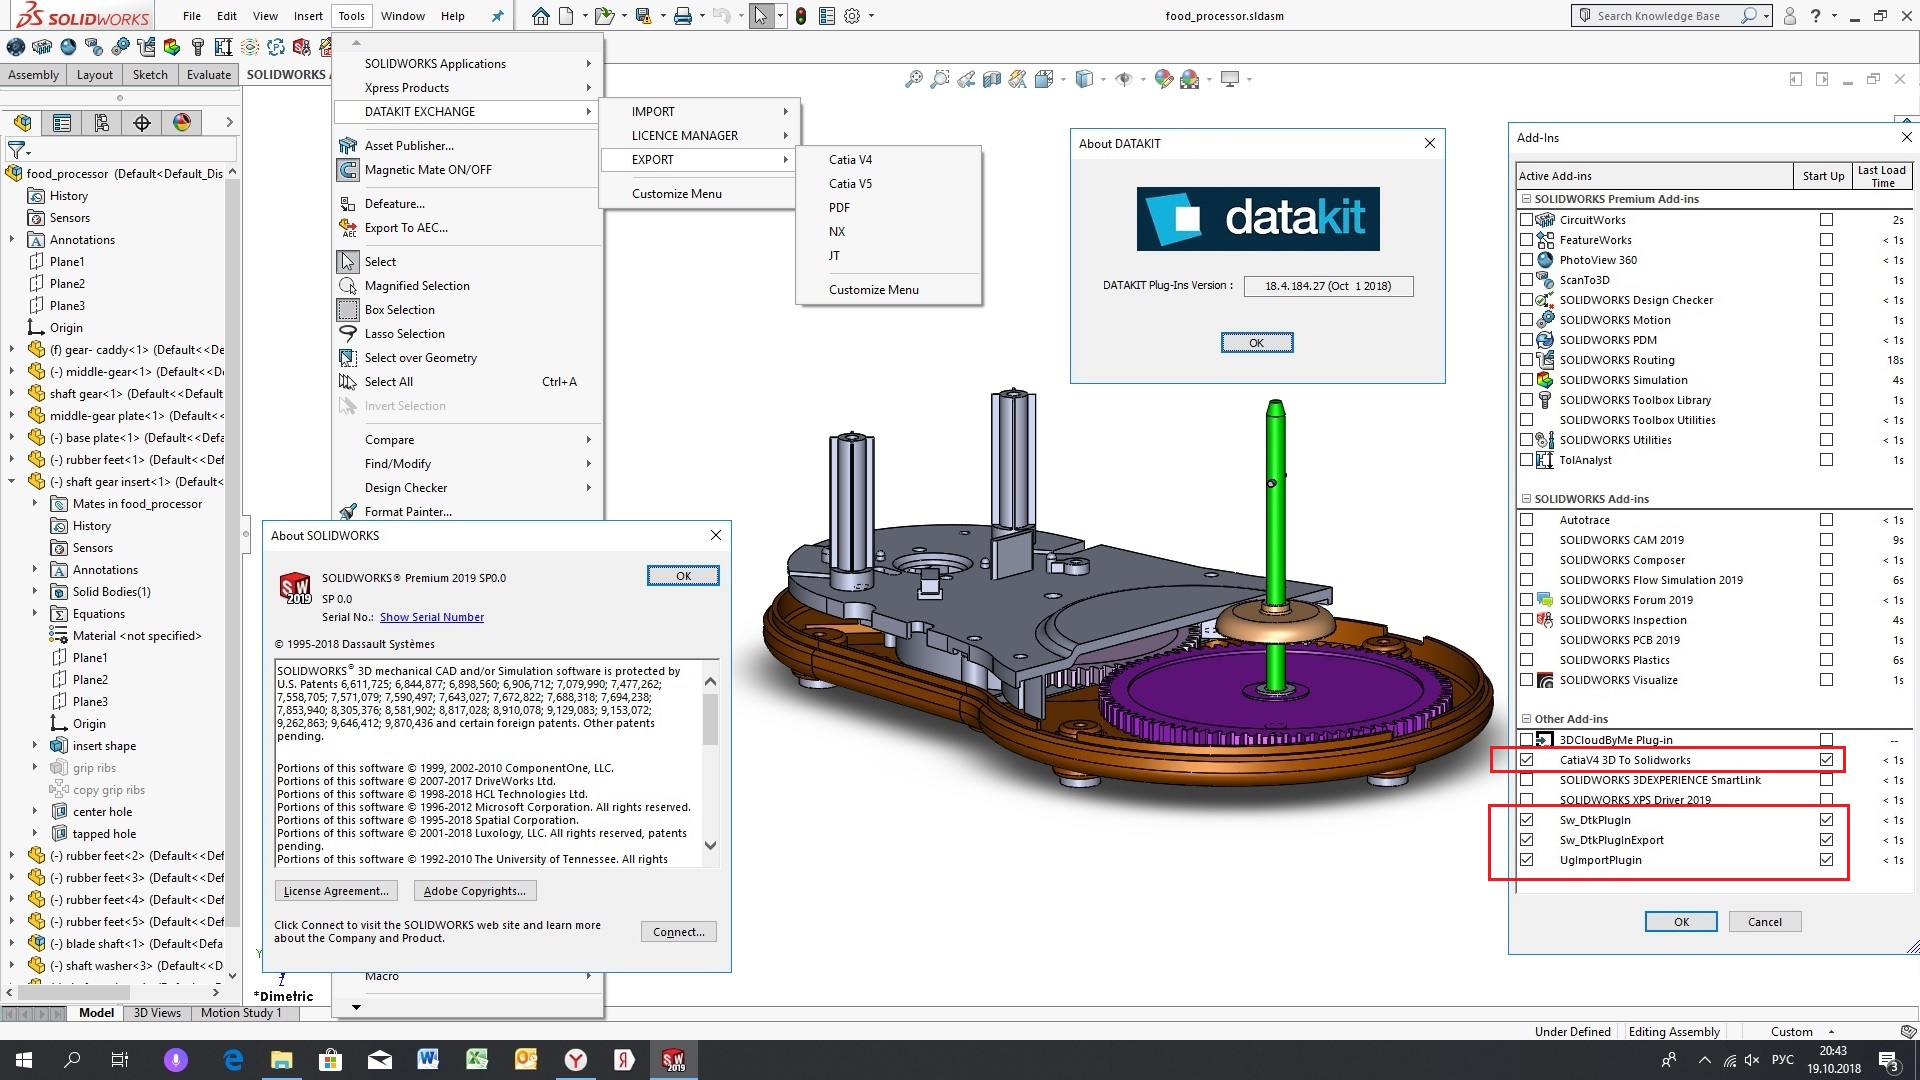 Working with DATAKIT 2018.4 Import-Export for SolidWorks 2010-2019